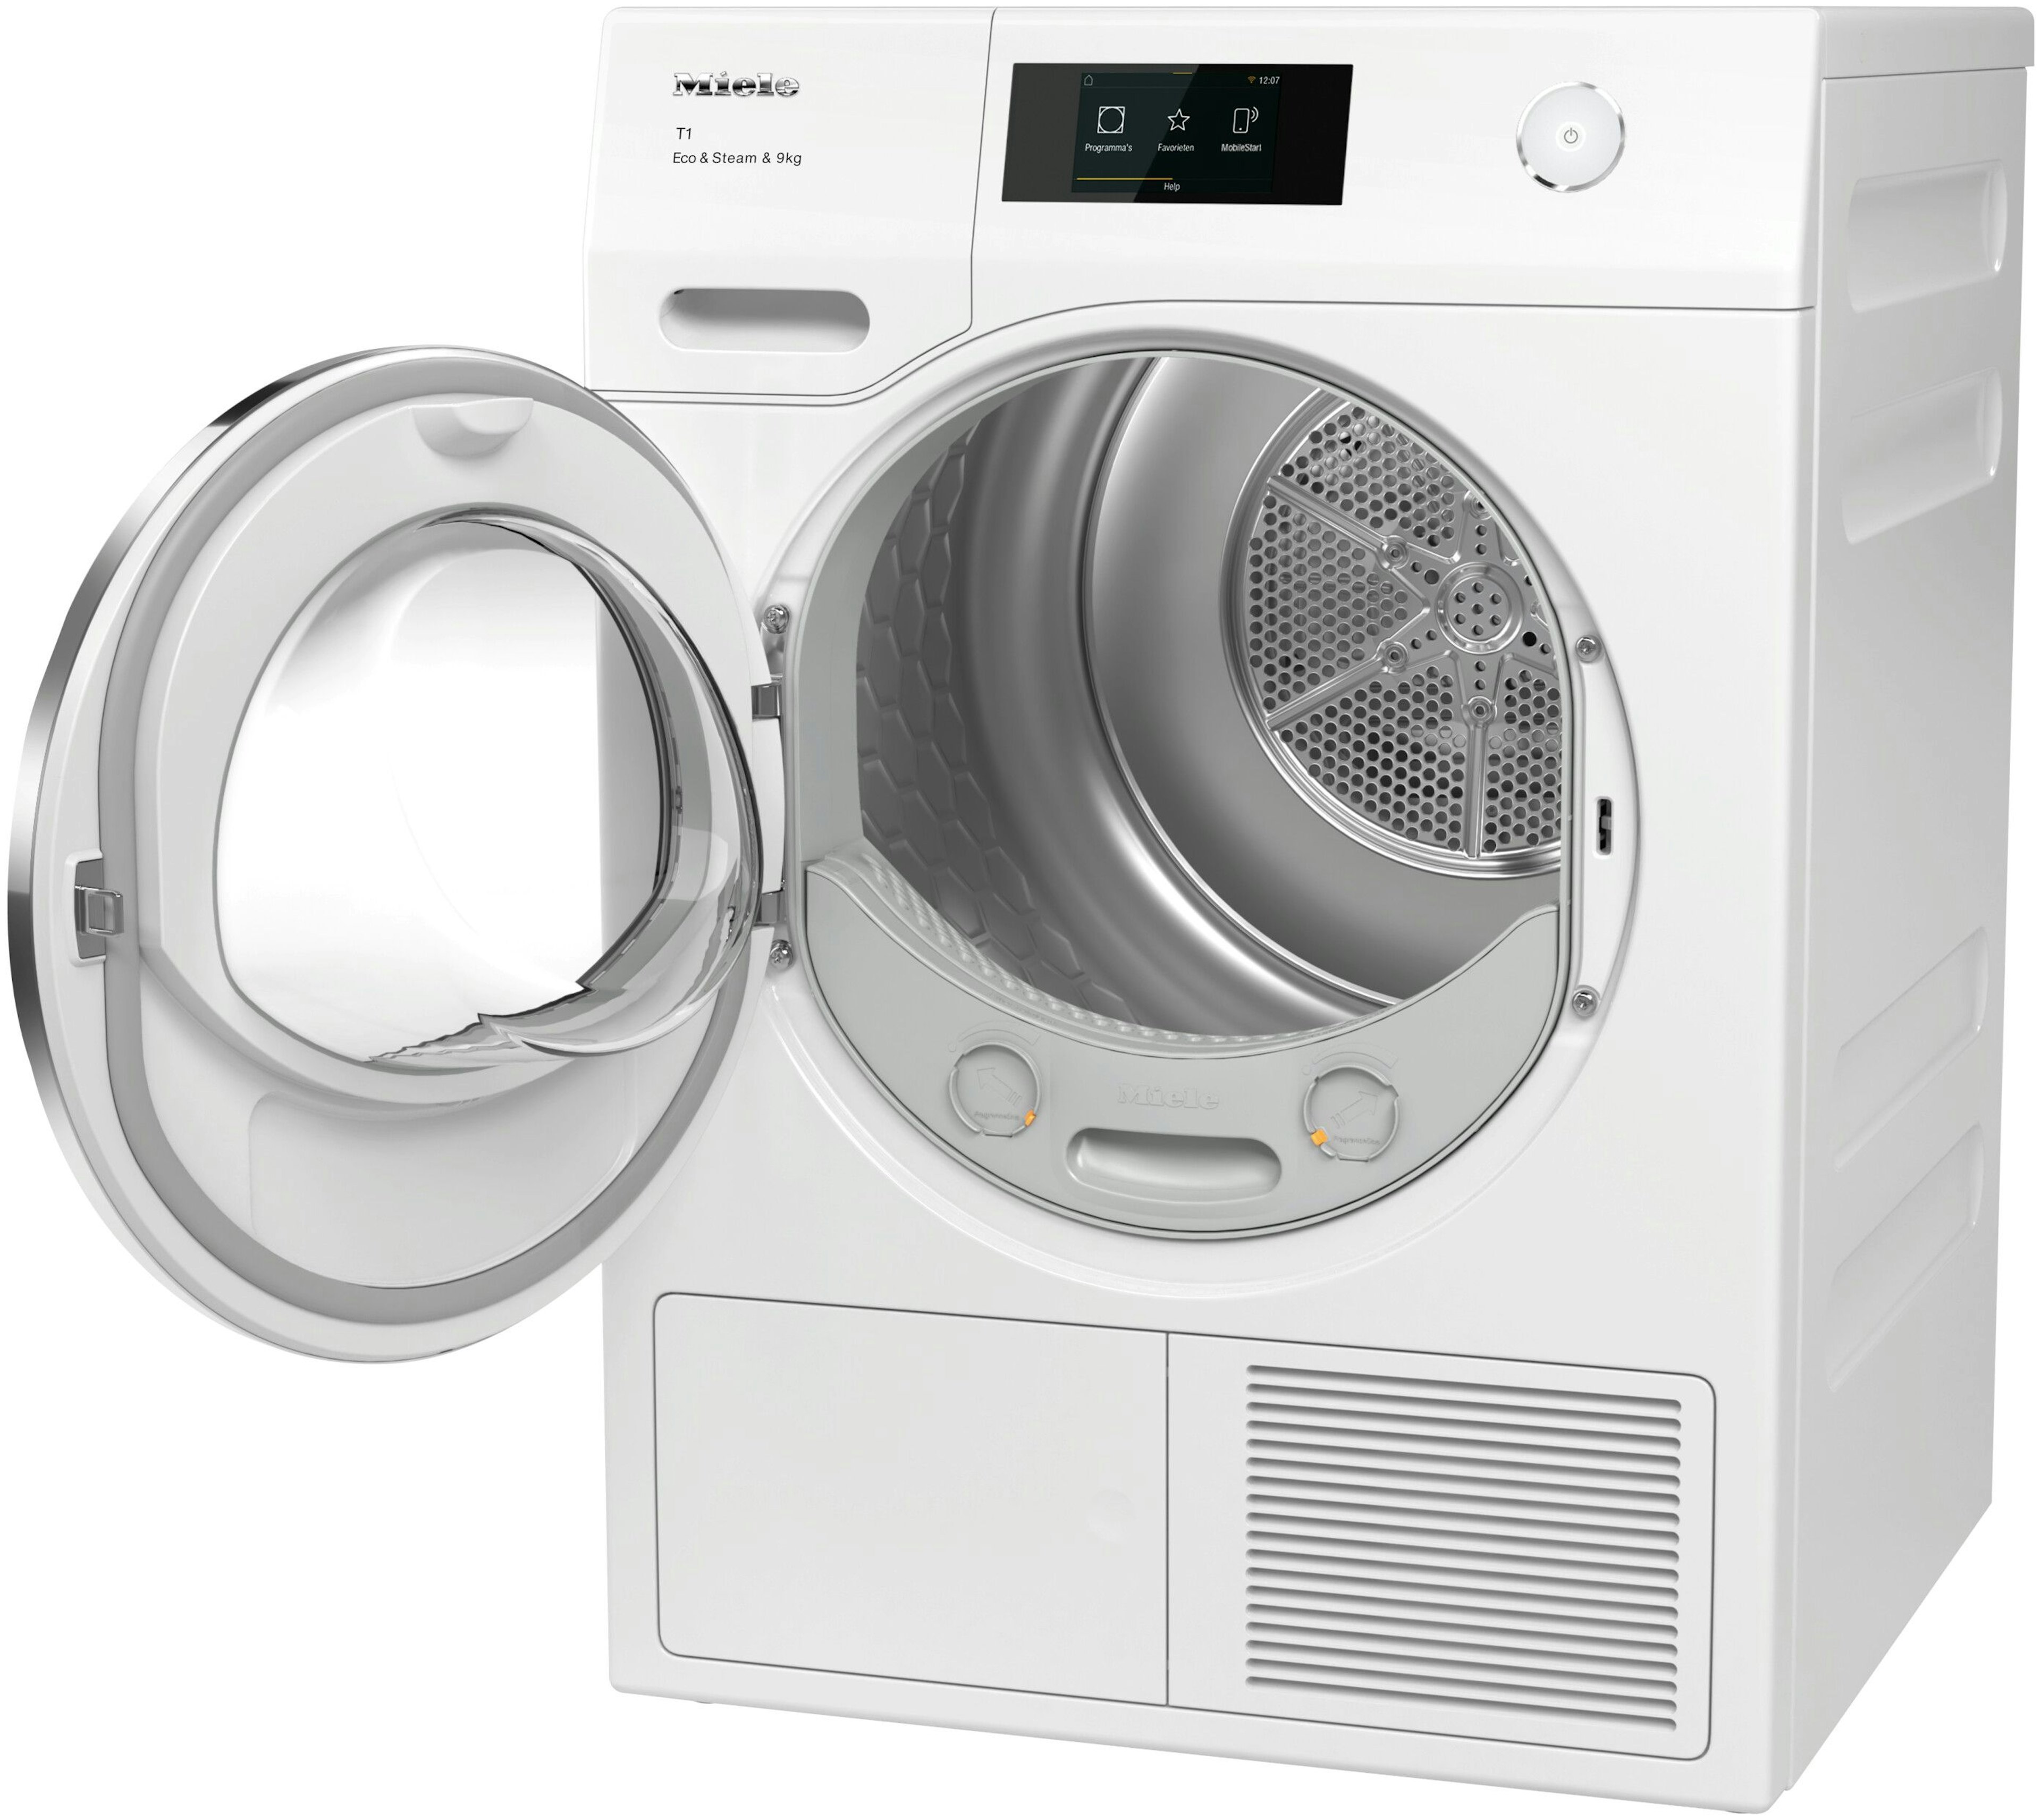 Miele wasdroger  TCR790WP afbeelding 4